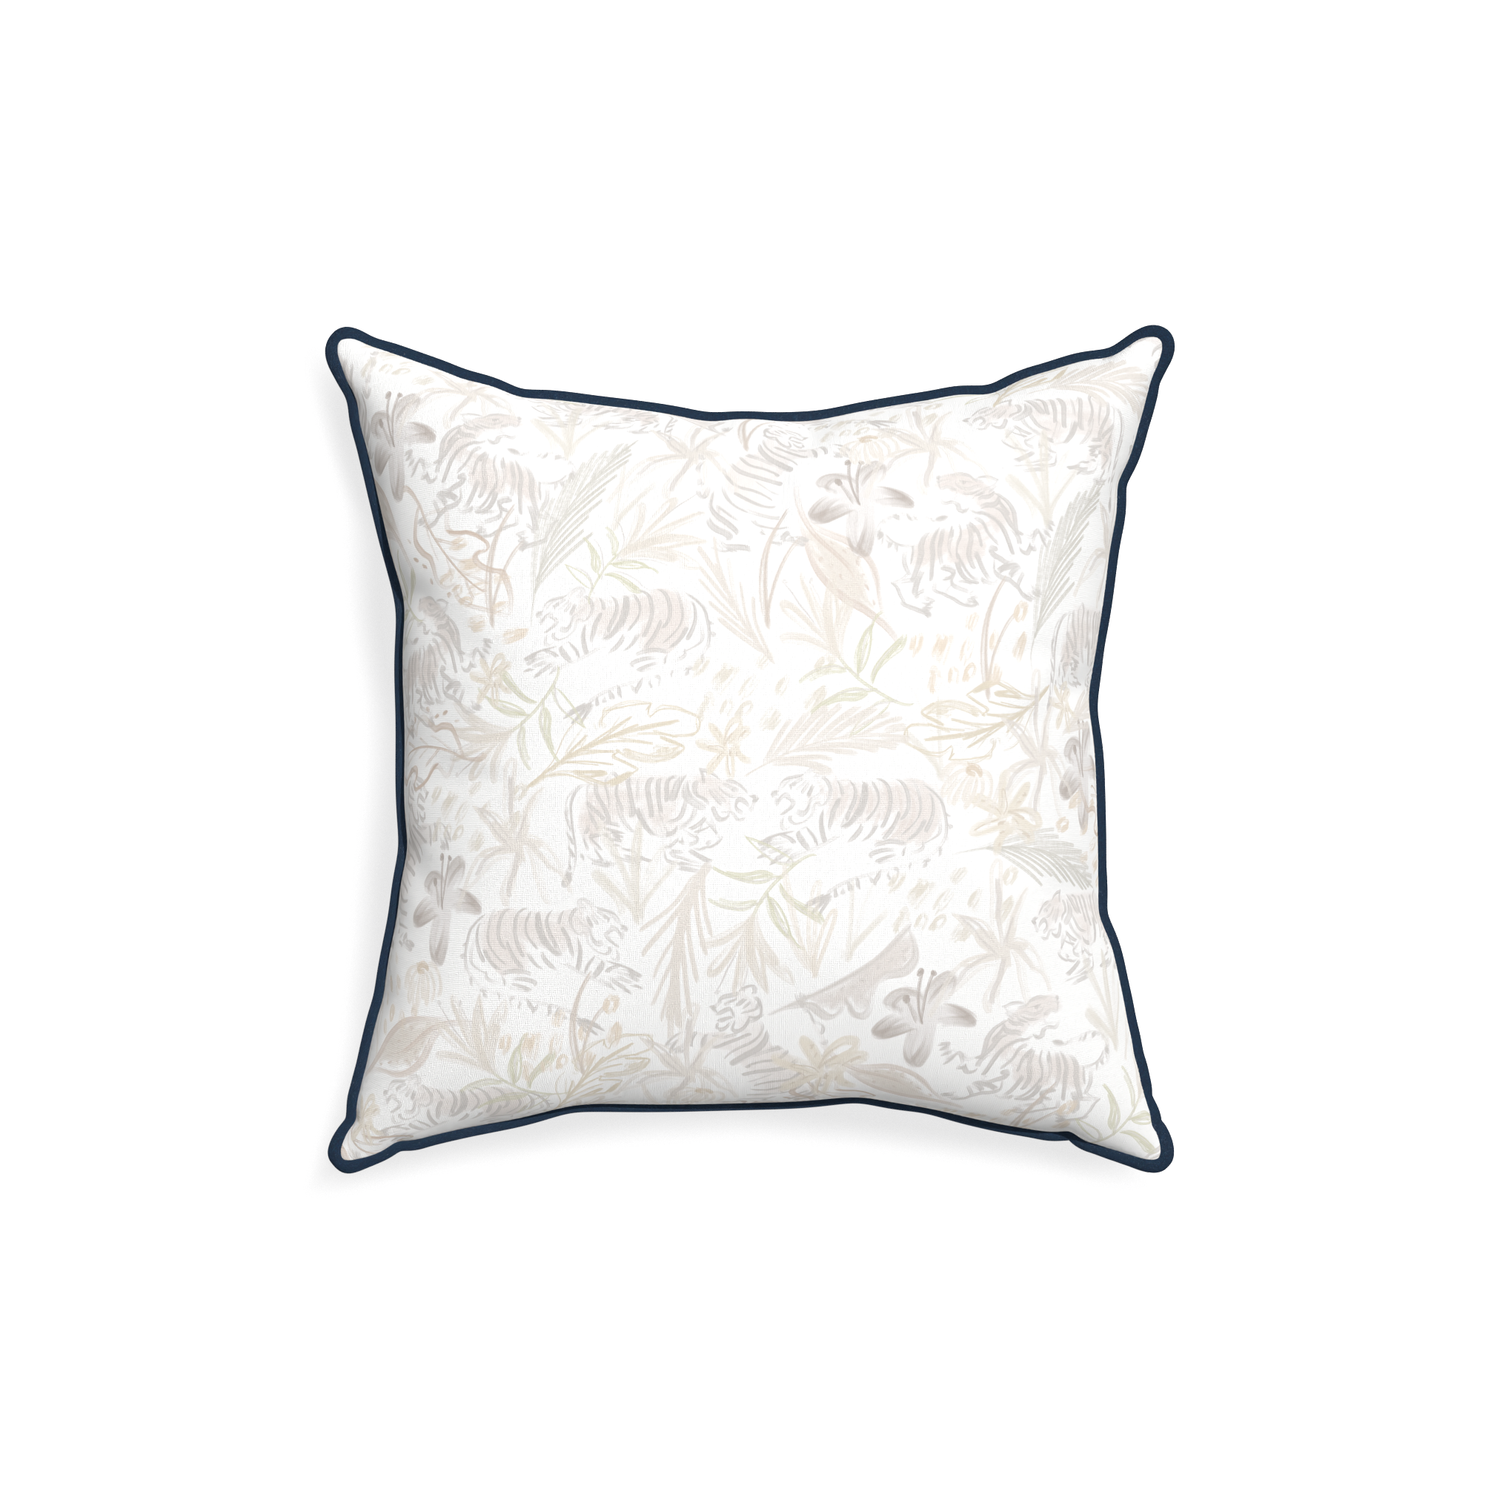 18-square frida sand custom beige chinoiserie tigerpillow with c piping on white background